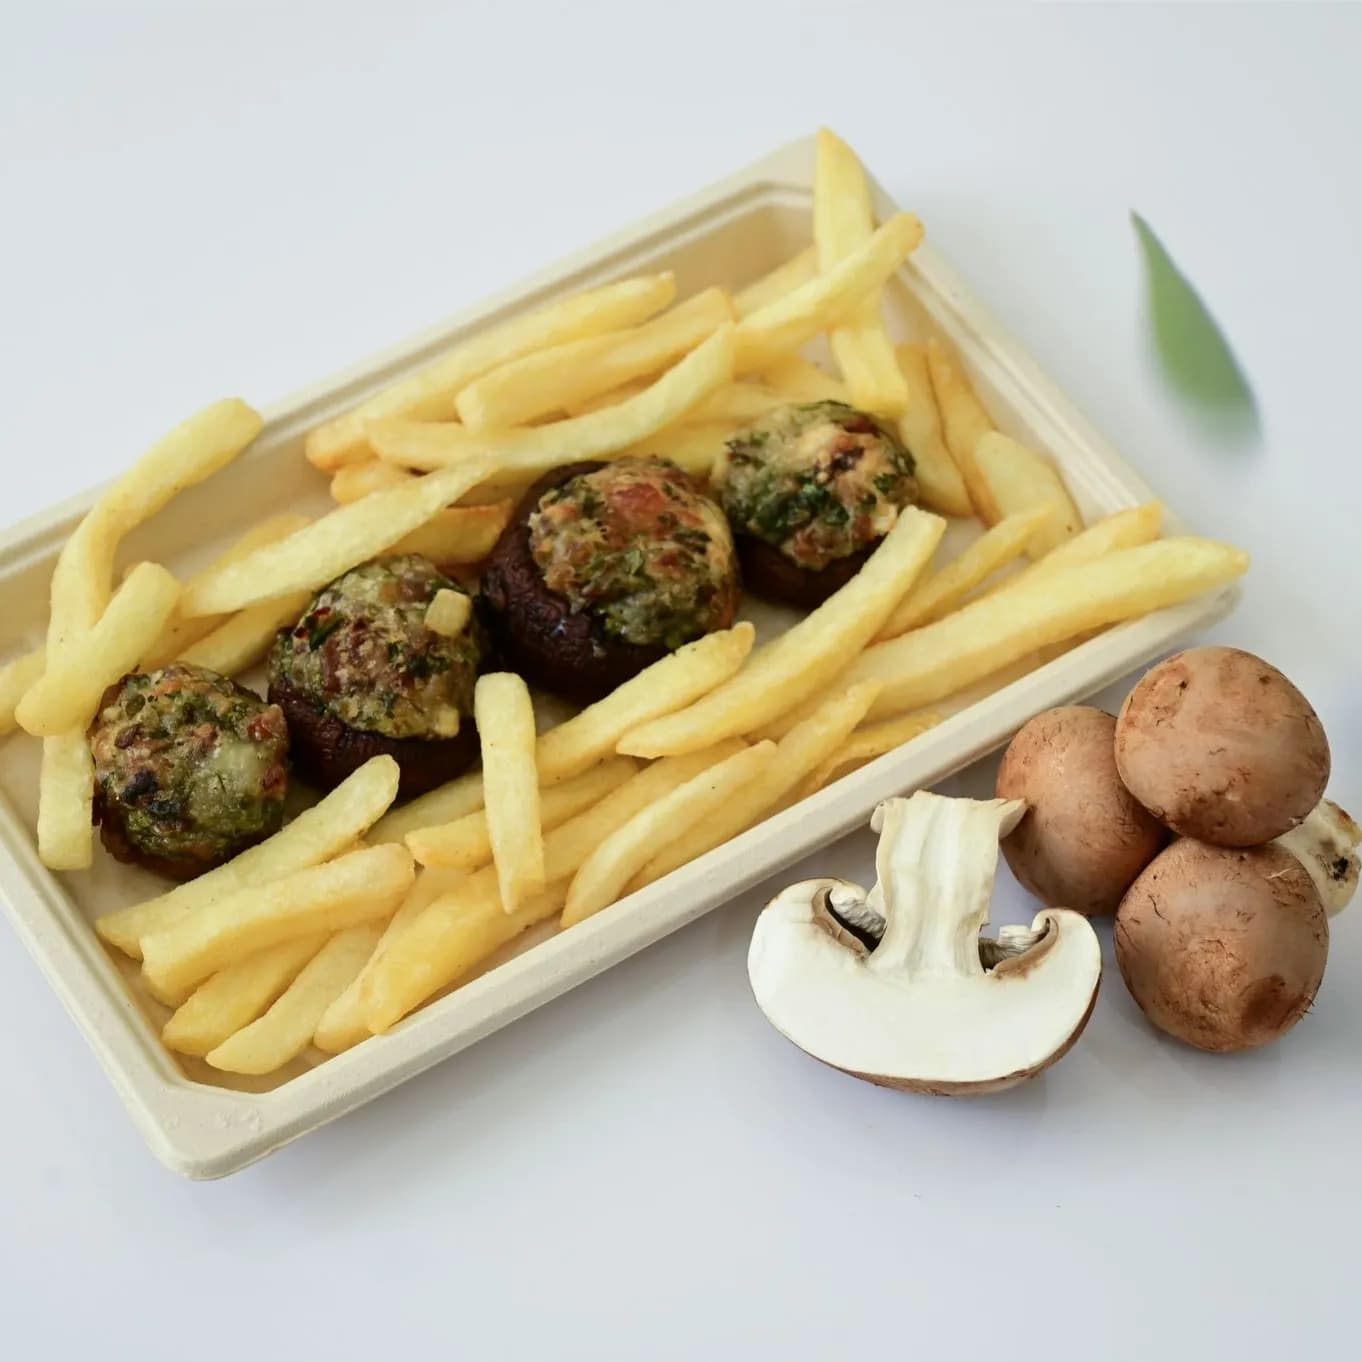 Cheese Stuffed Mushrooms with French Fries